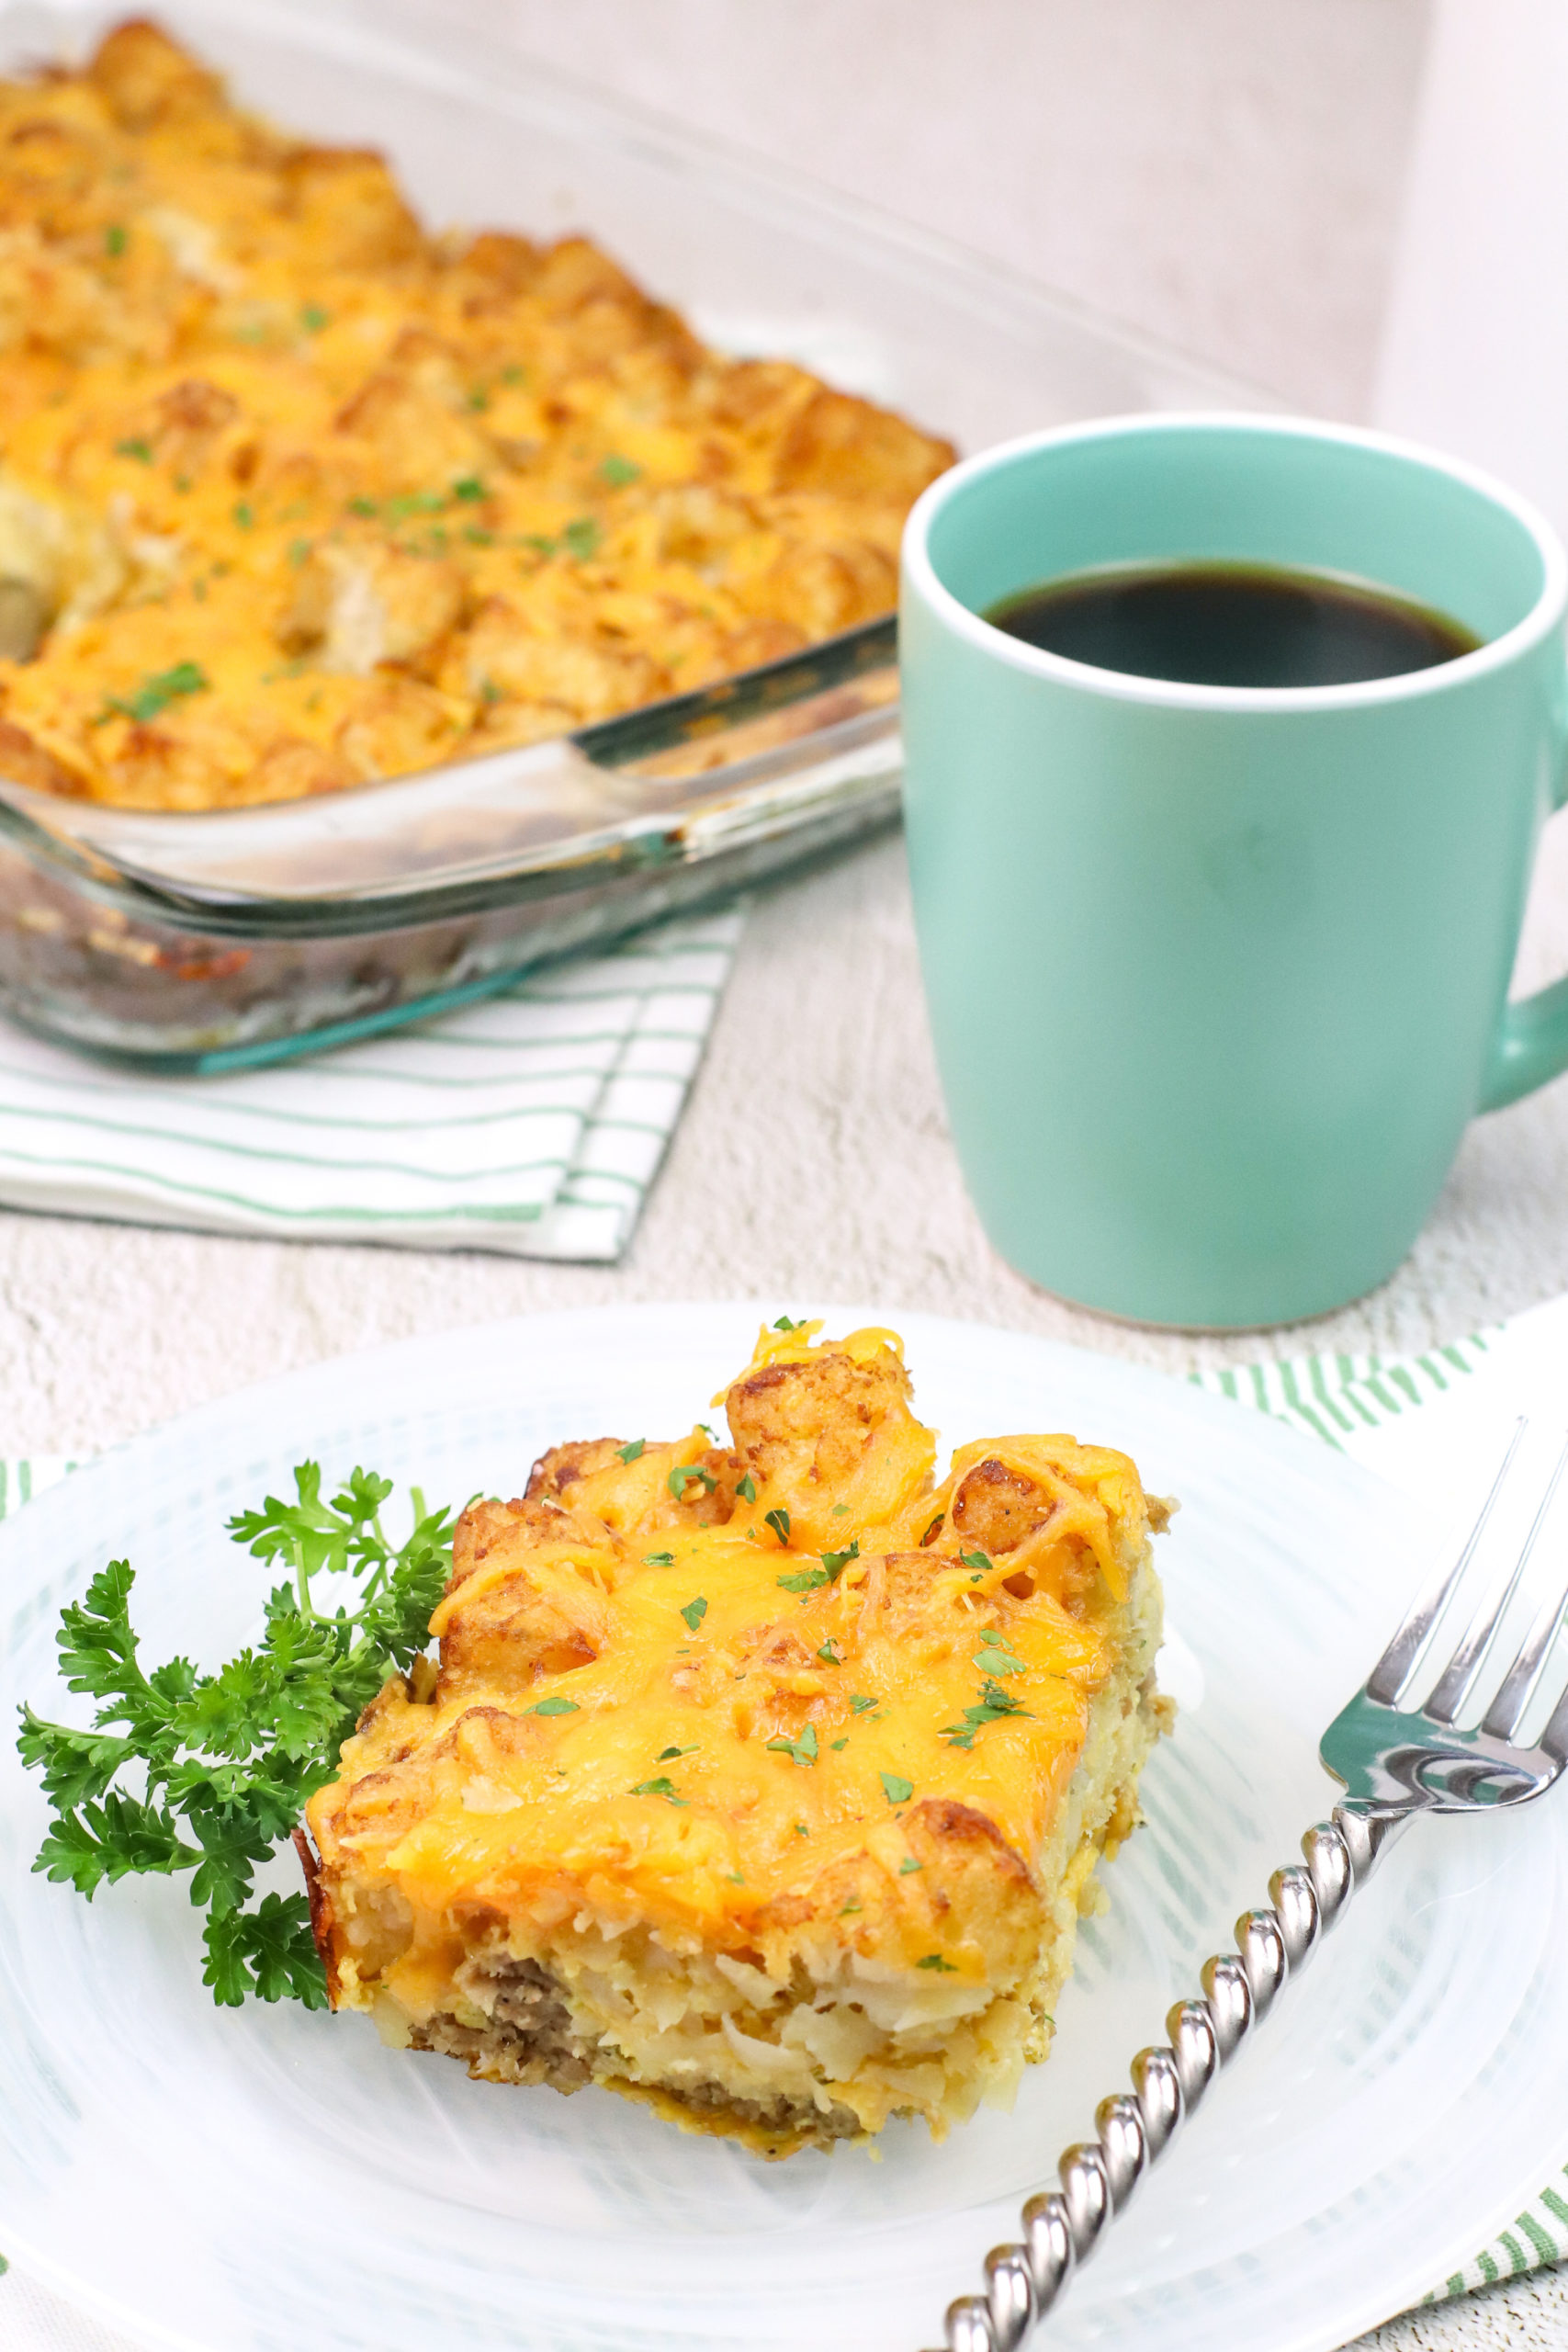 Tater Tot Sausage Breakfast Casserole on a plate with a cup of coffee